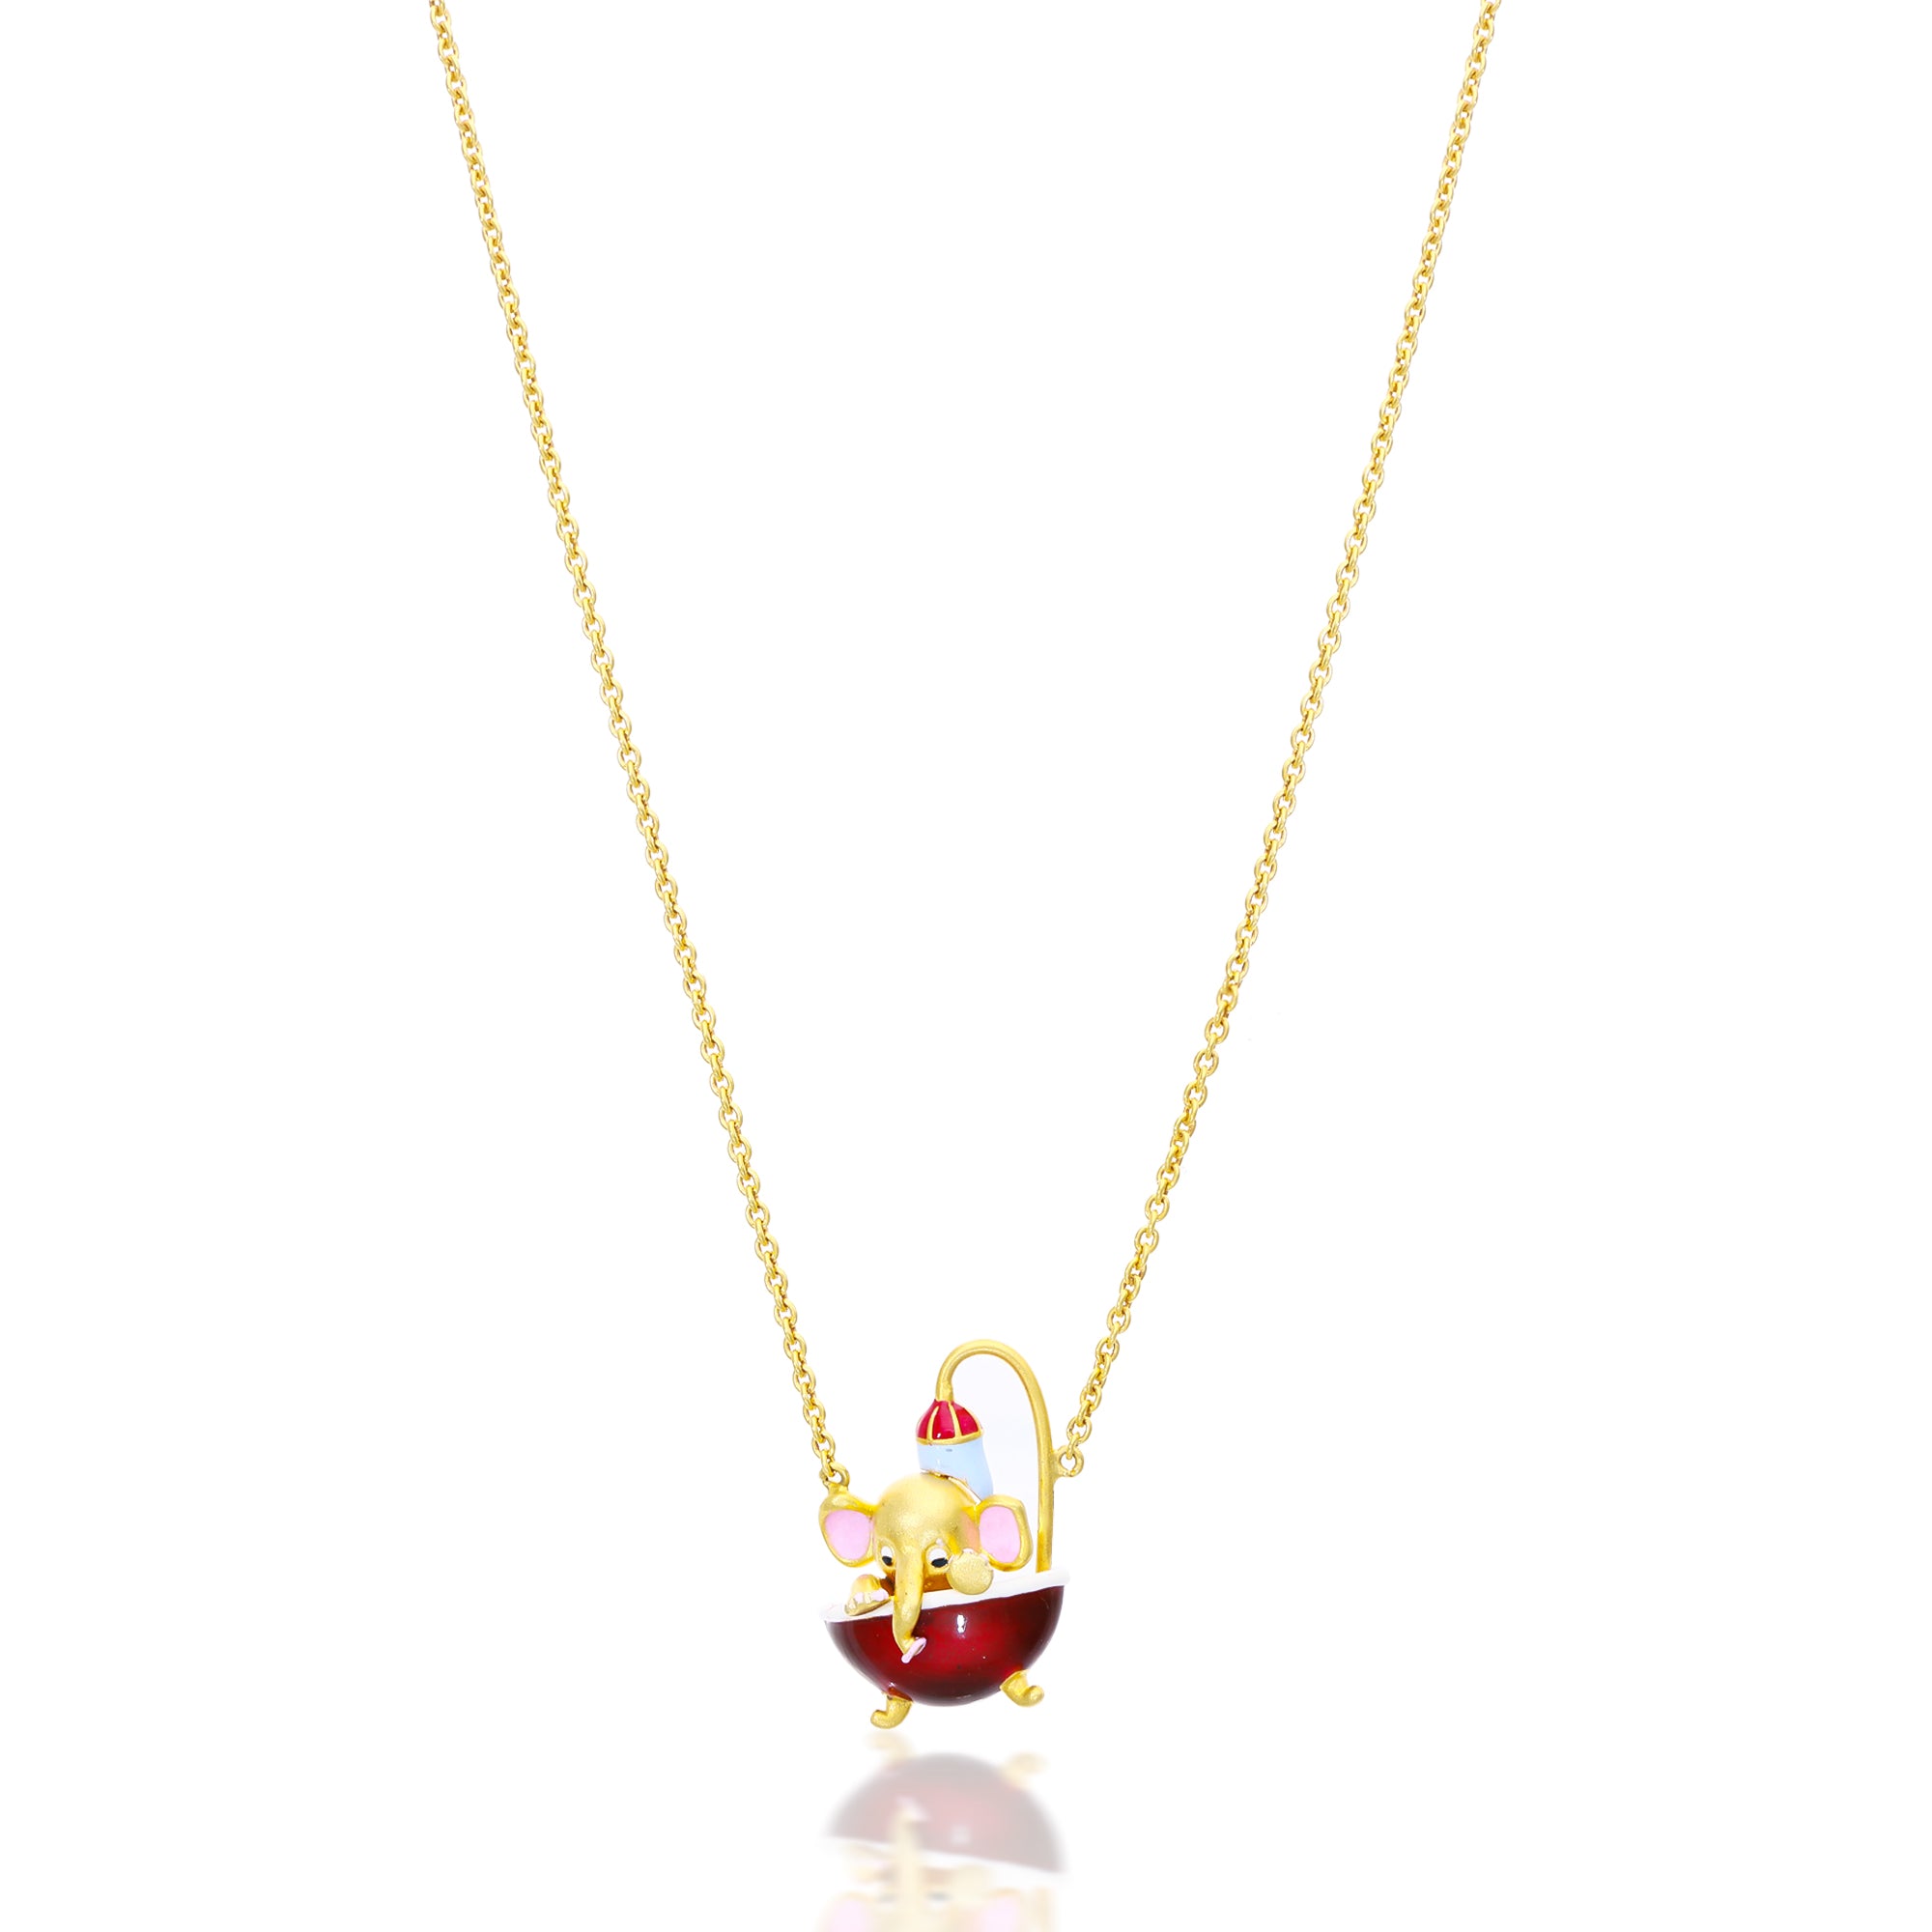 Charming Elephant Pendent with Chain